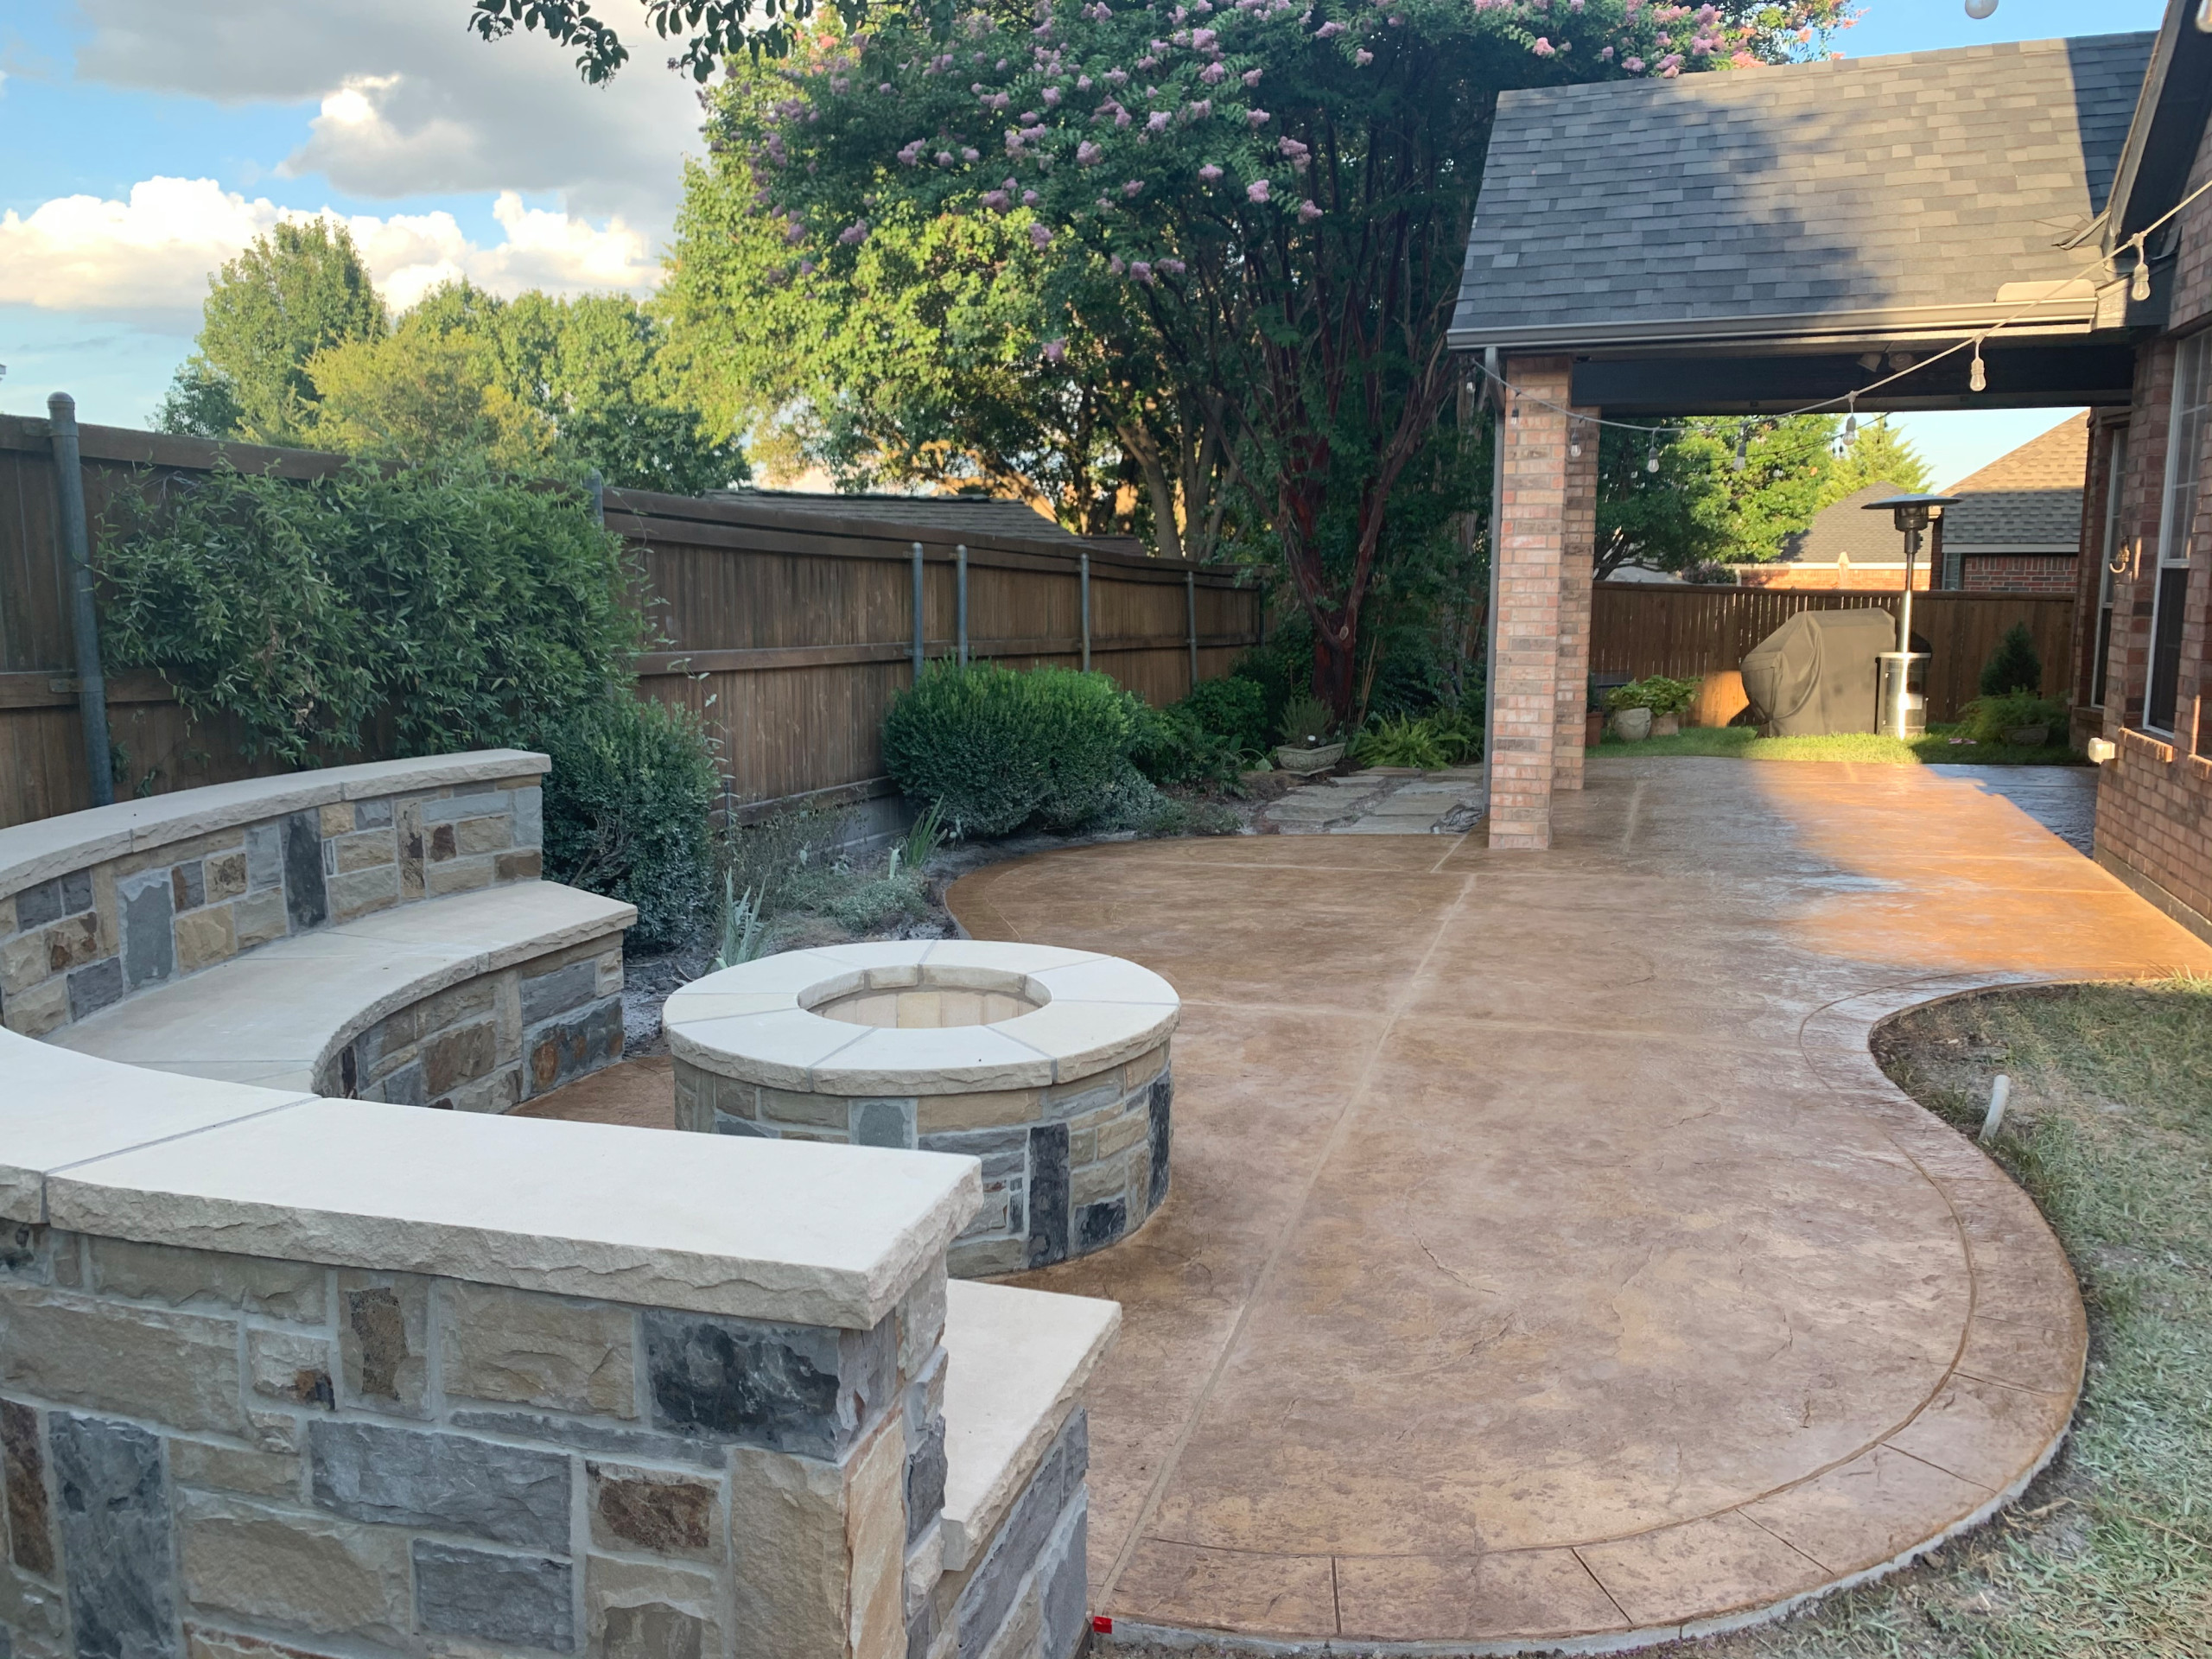 Stone benches, fire pit and stamped concrete